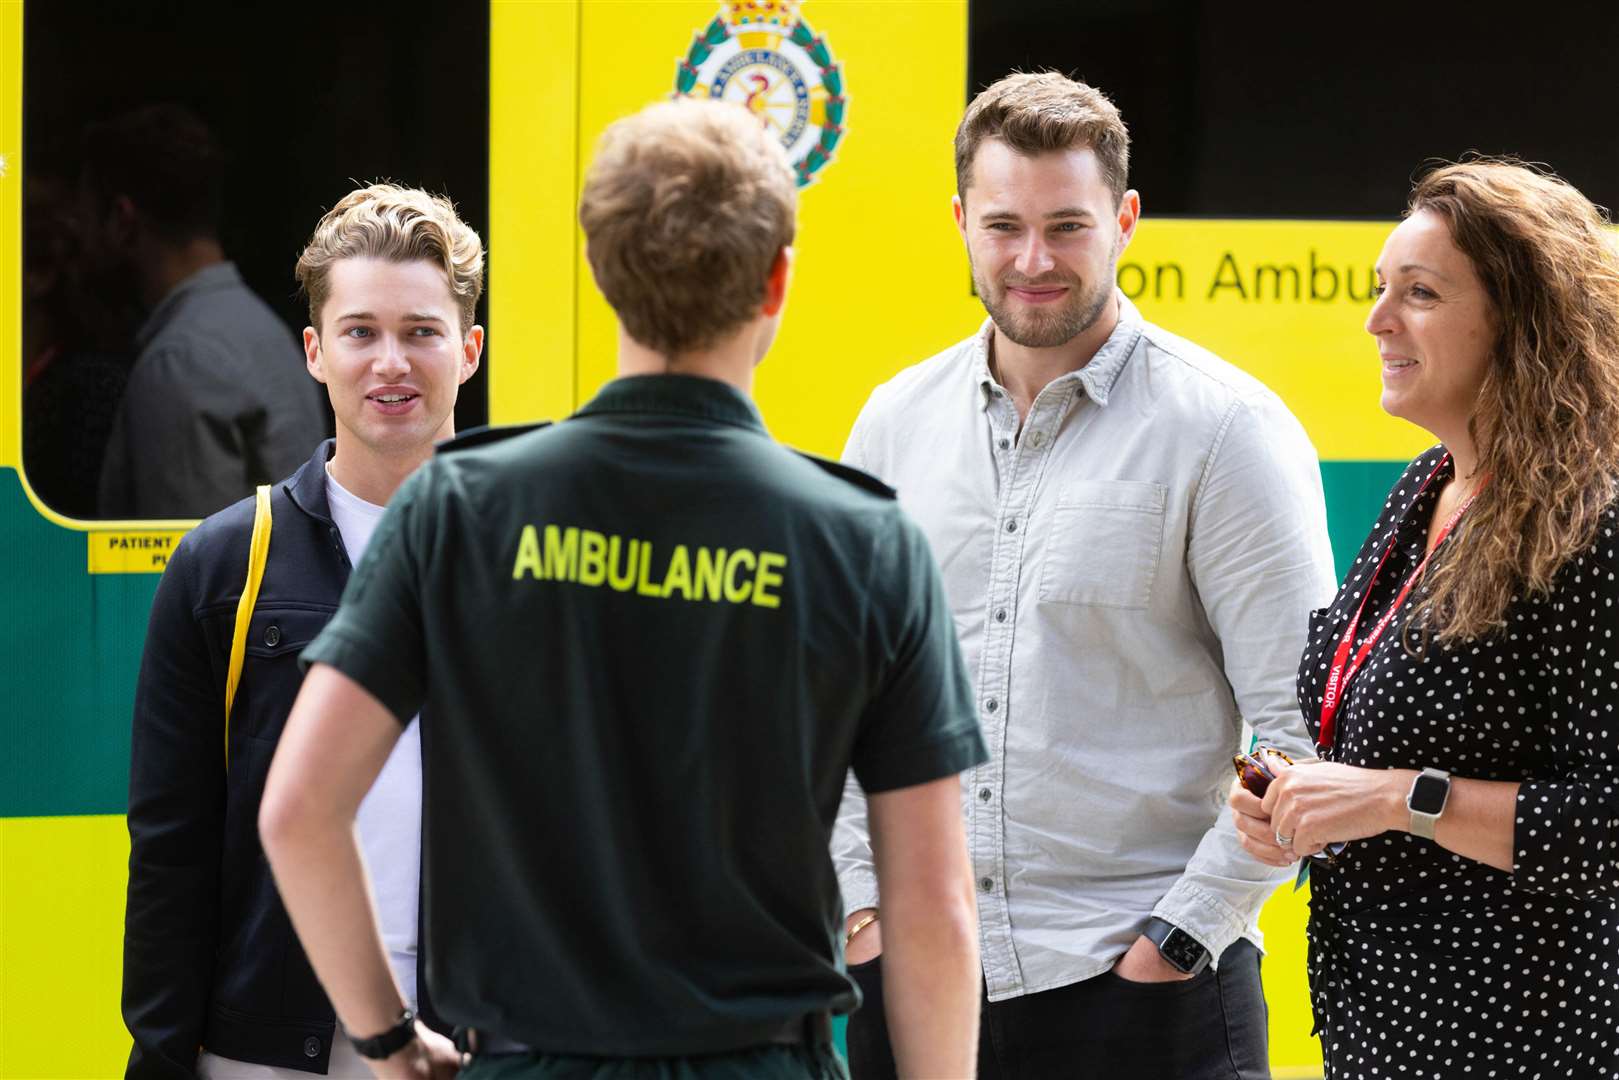 The professional dancers visited the London Ambulance Service and Chelsea and Westminster Hospital on Tuesday (David Parry/PA)